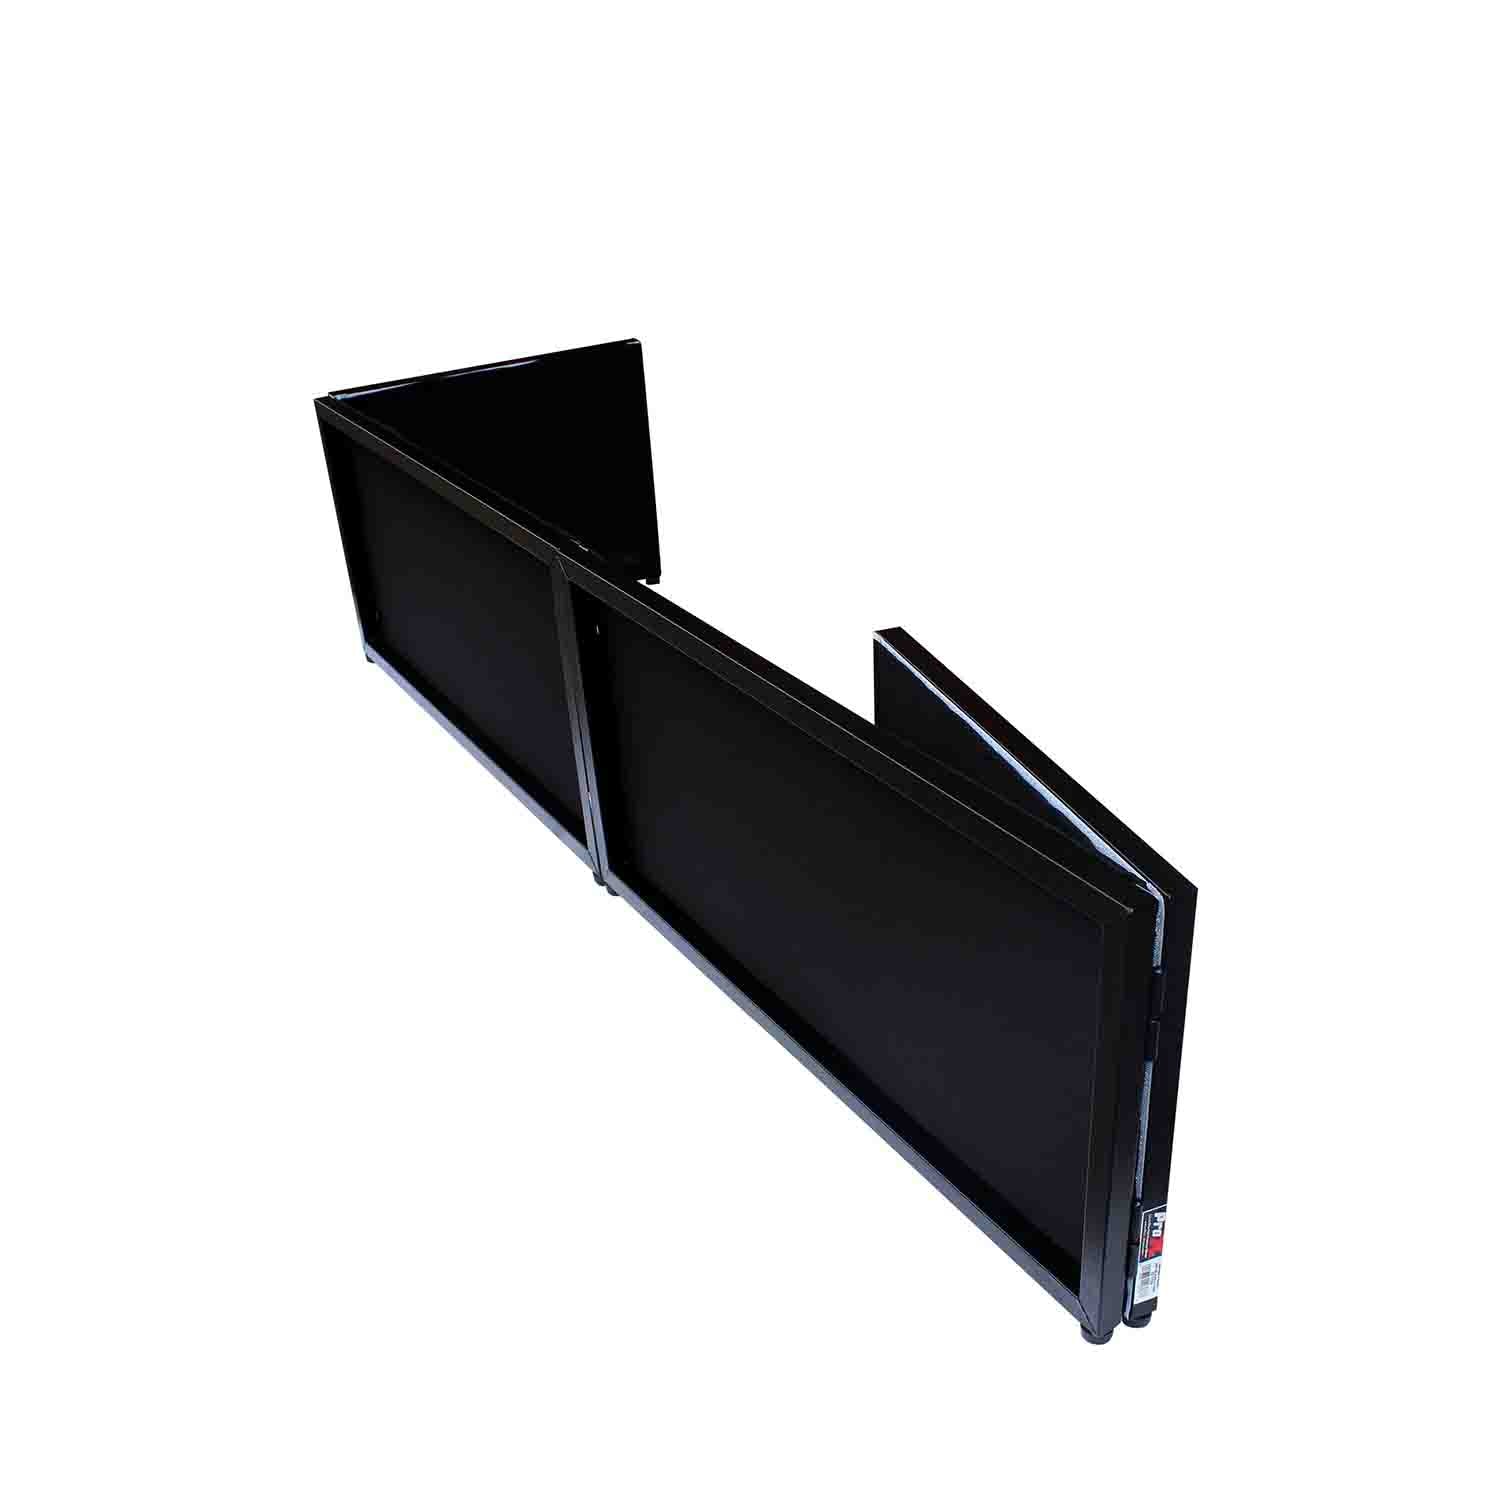 ProX XF-TTFB Tabletop DJ Facade with Black Frame - 6 Ft by ProX Cases